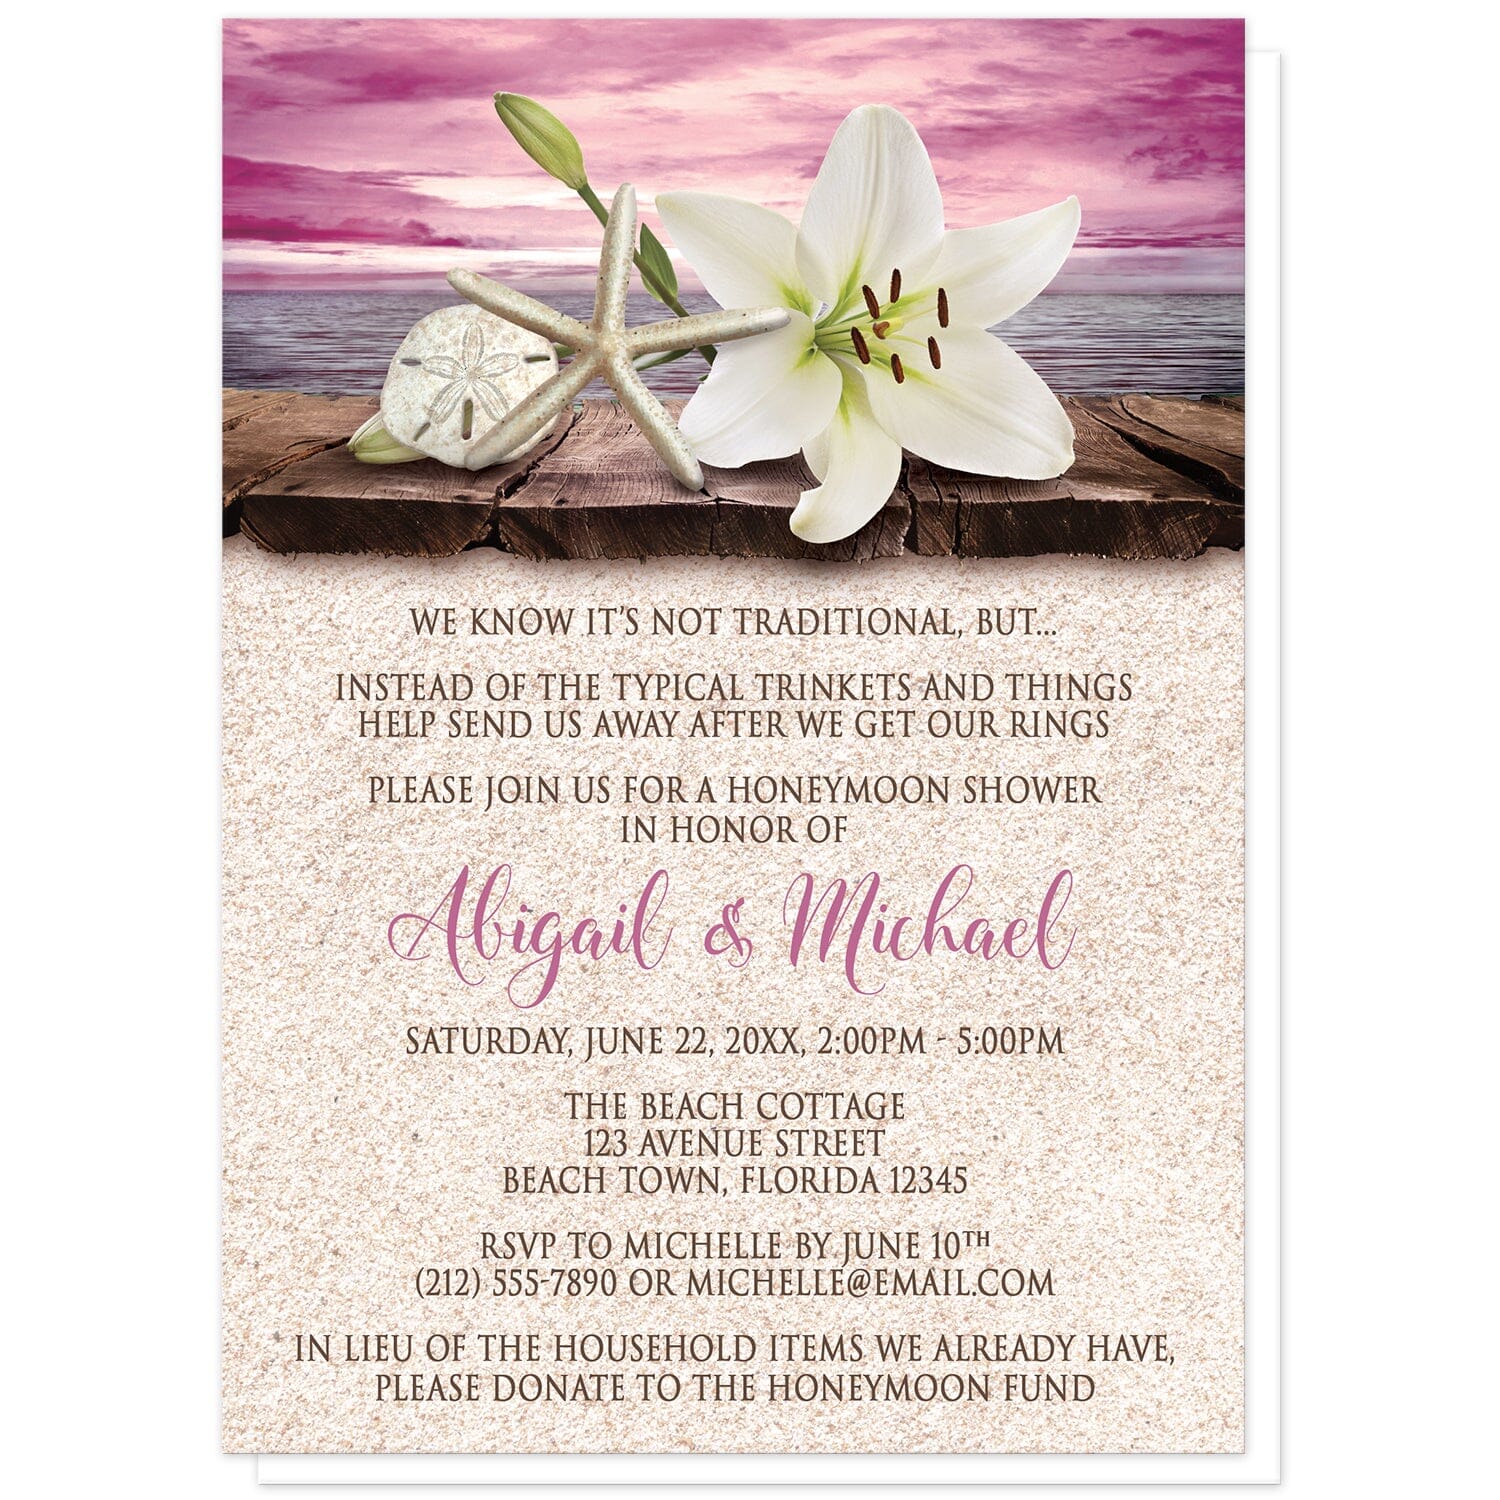 Lily Seashells and Sand Magenta Beach Honeymoon Shower Invitations at Artistically Invited. Tropical lily seashells and sand magenta beach honeymoon shower invitations with an elegant white lily, a starfish, and a sand dollar on a rustic wood dock overlooking the open water under a magenta sunset sky. Your personalized honeymoon shower celebration details are custom printed in dark brown and magenta over a beige sand background design. 